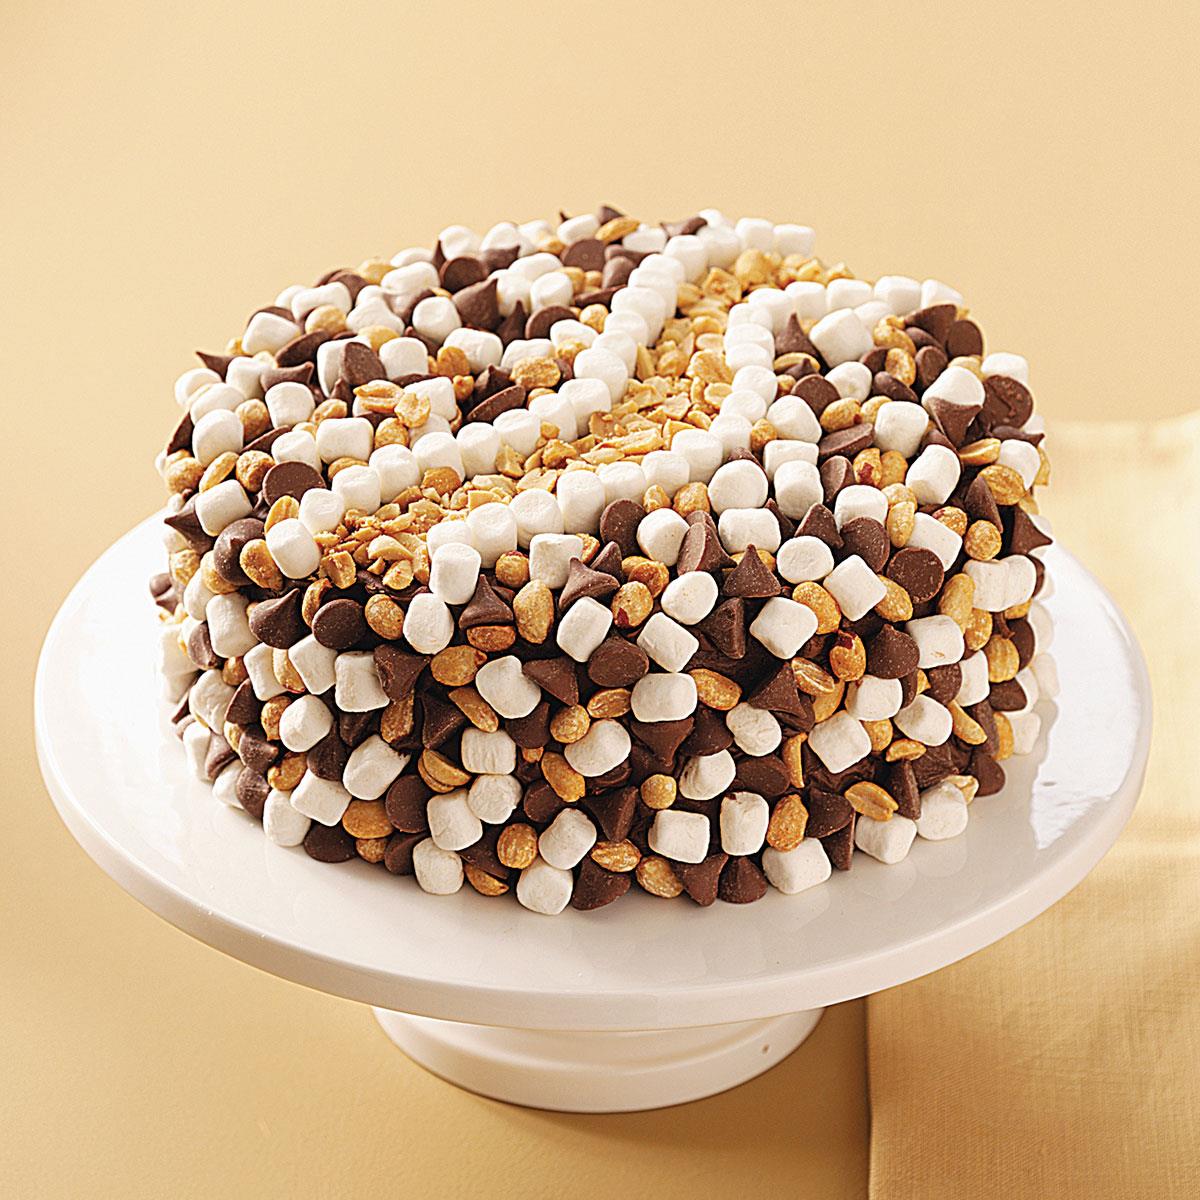 Rocky Road Cake Recipe: How to Make It